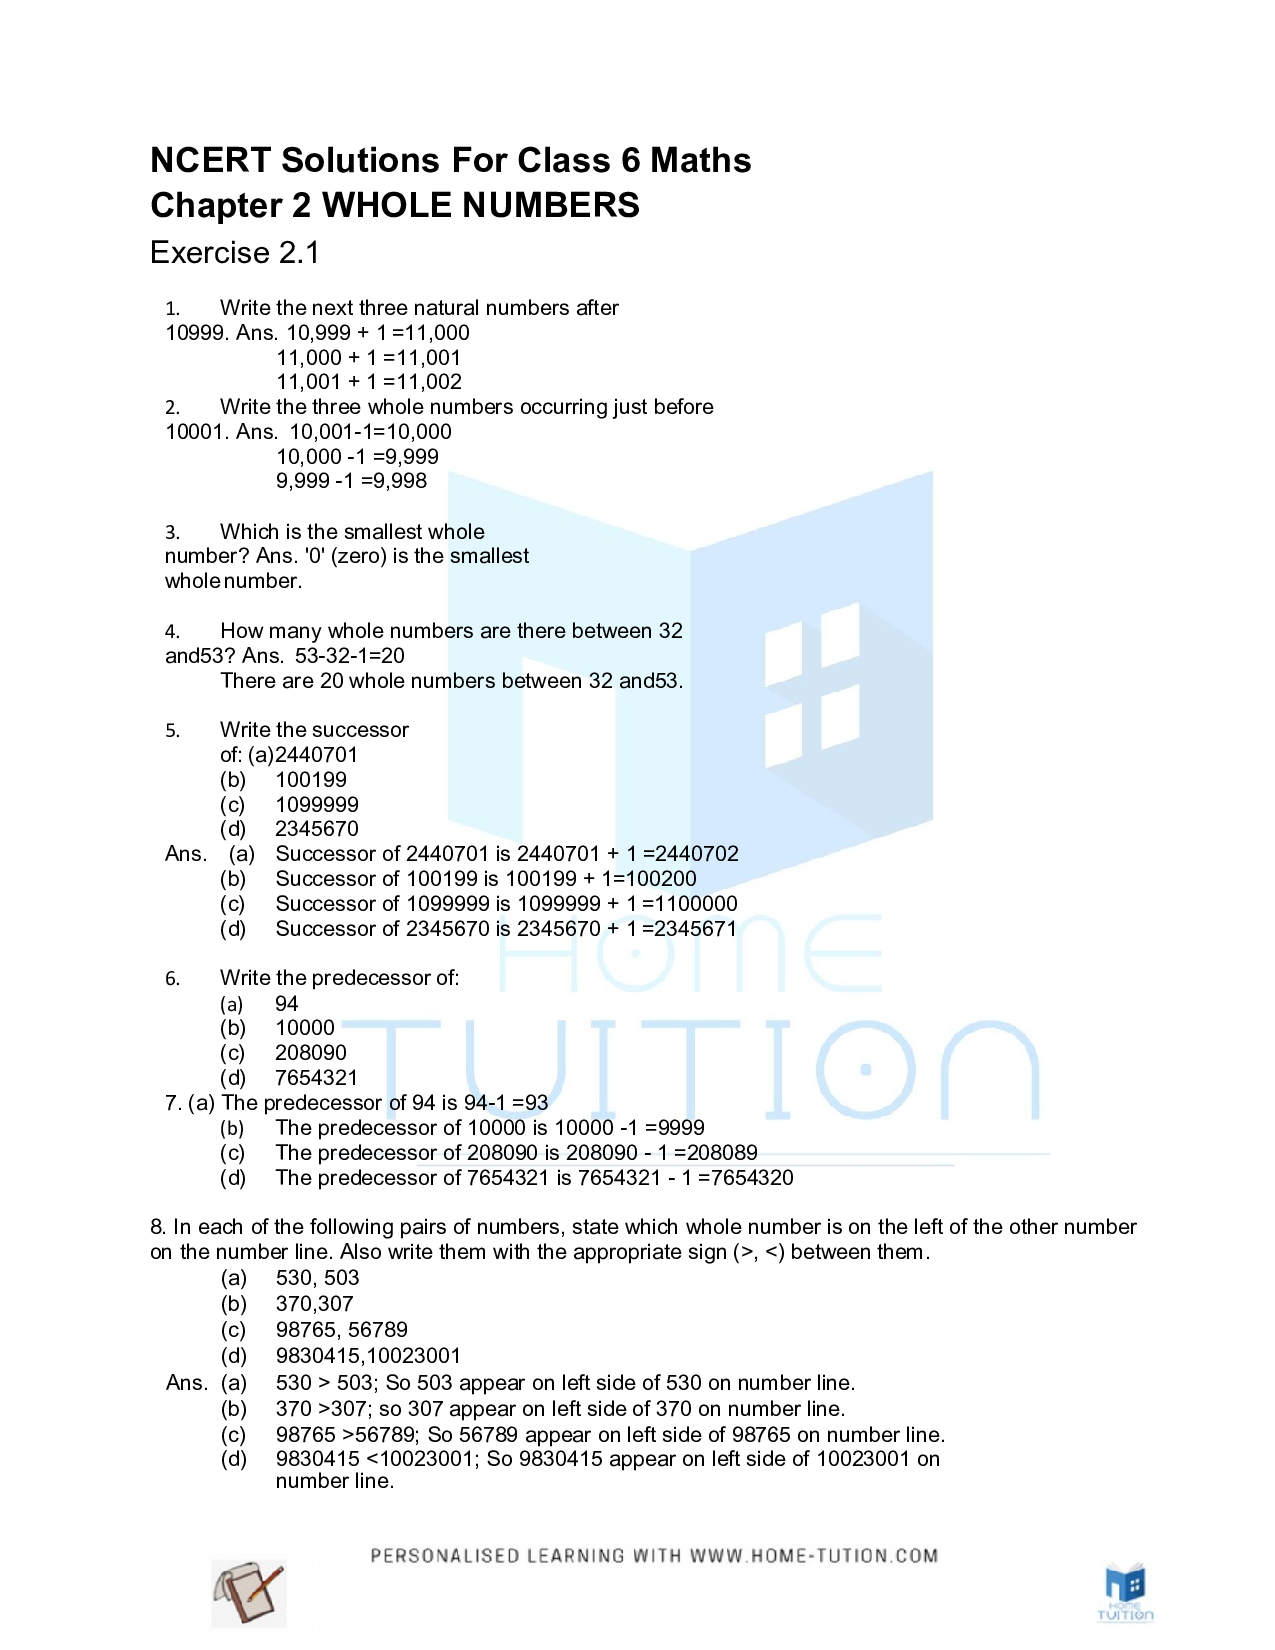 Class 6 Maths Chapter 2 Whole Numbers